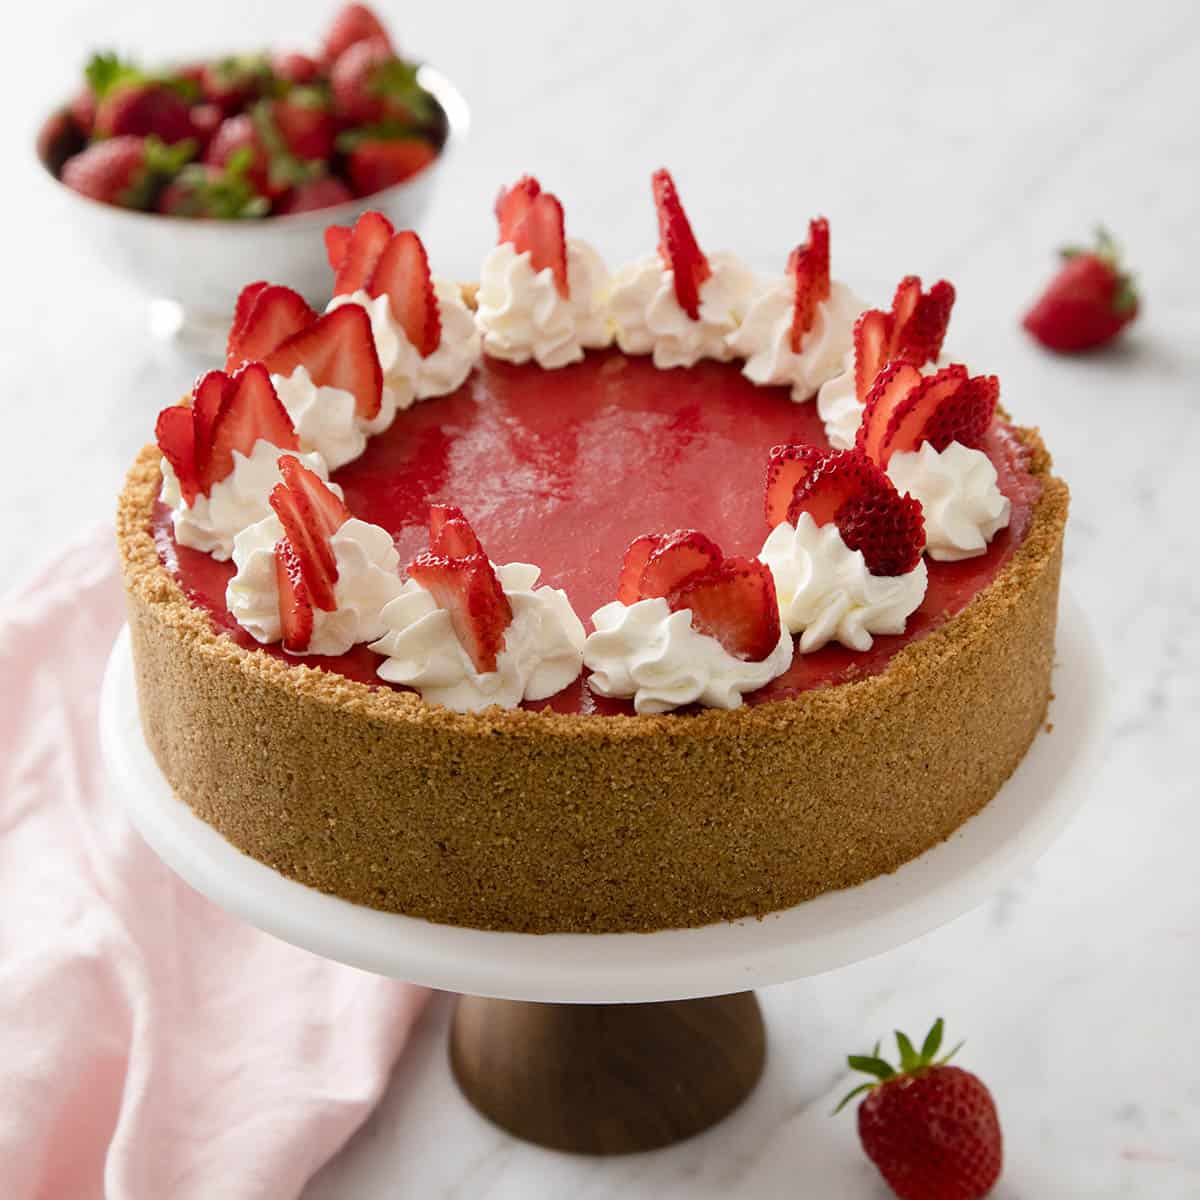 A no bake strawberry cheesecake with a Graham cracker crust.